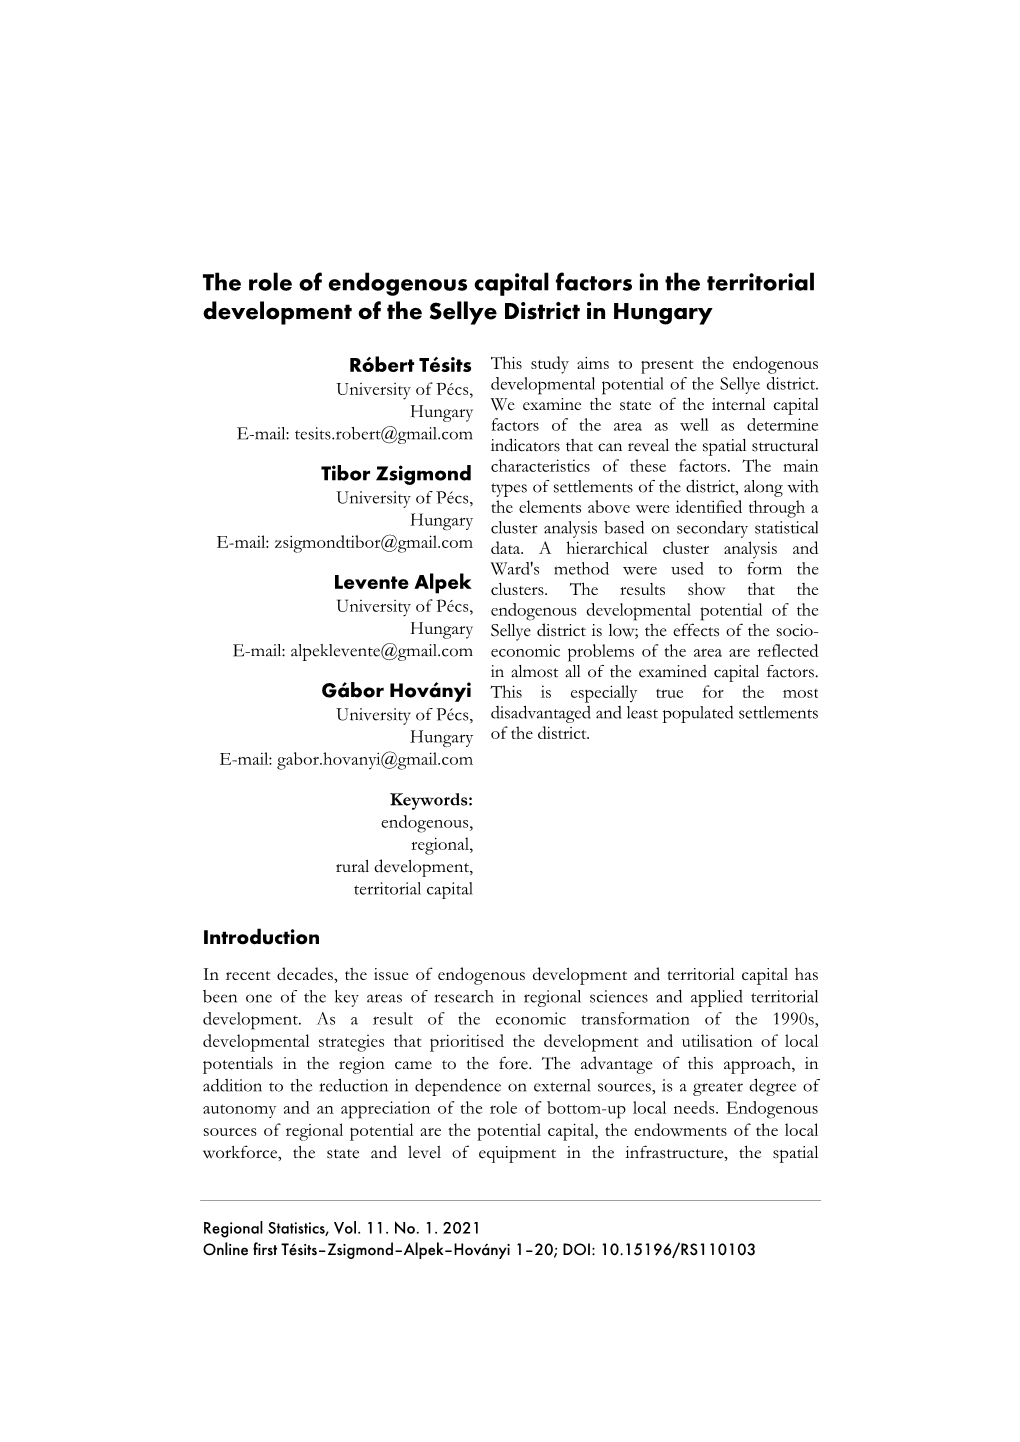 The Role of Endogenous Capital Factors in the Territorial Development of the Sellye District in Hungary